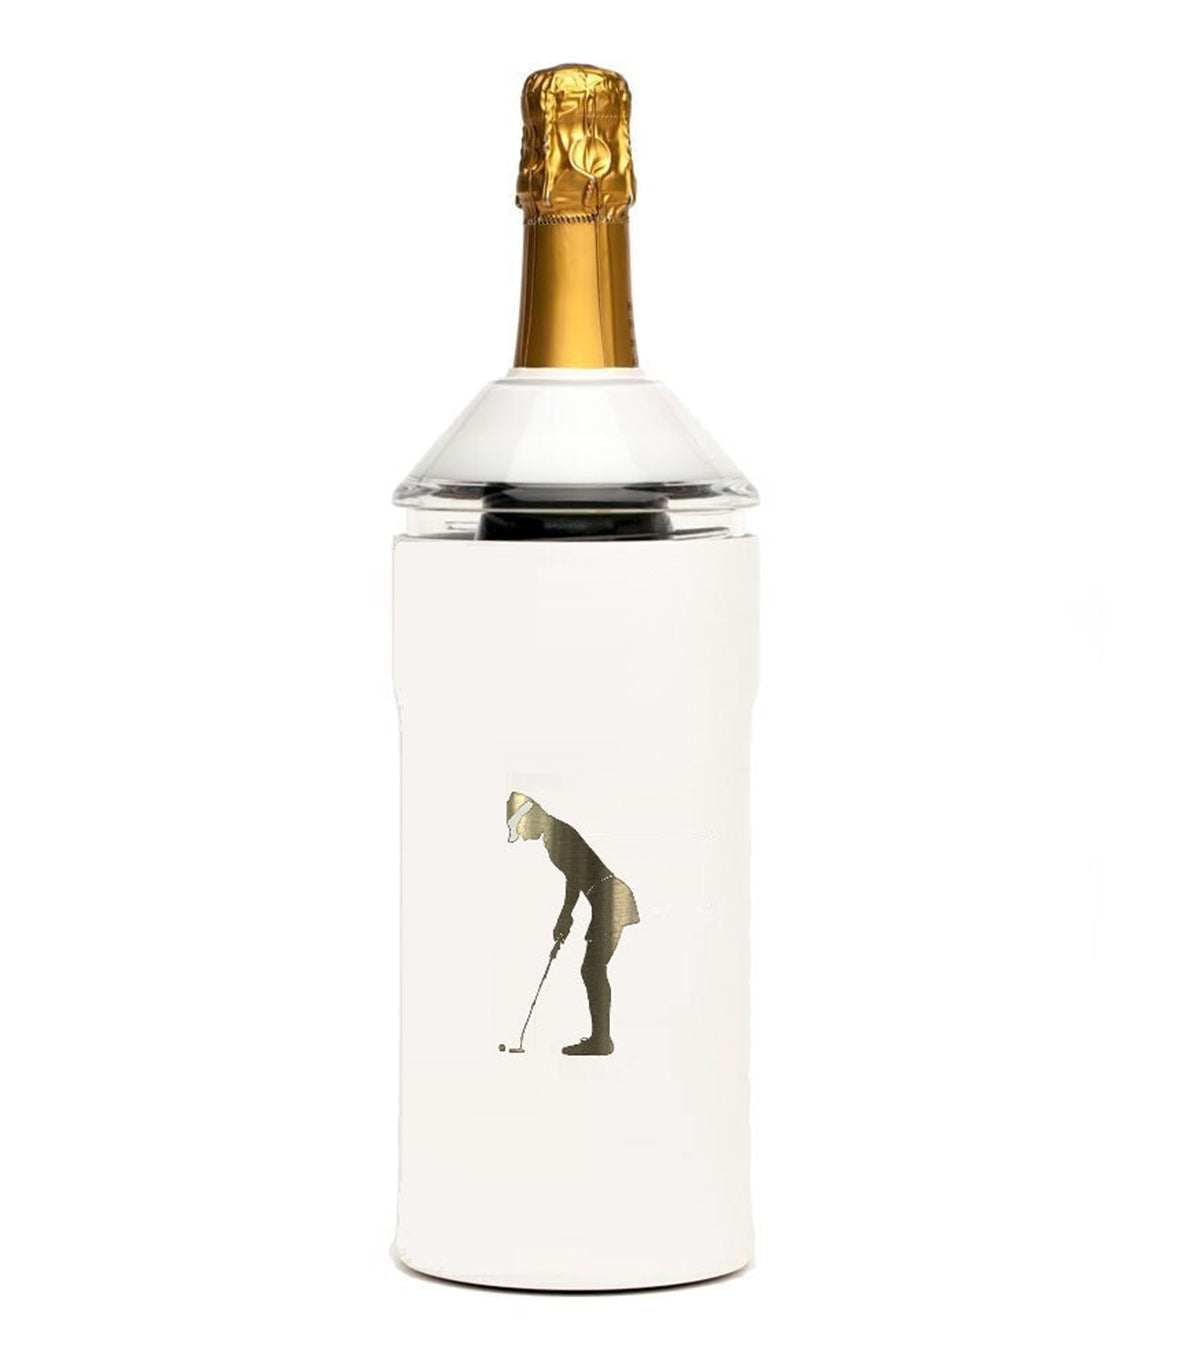 Limited Edition Golf Wine Set In Navy